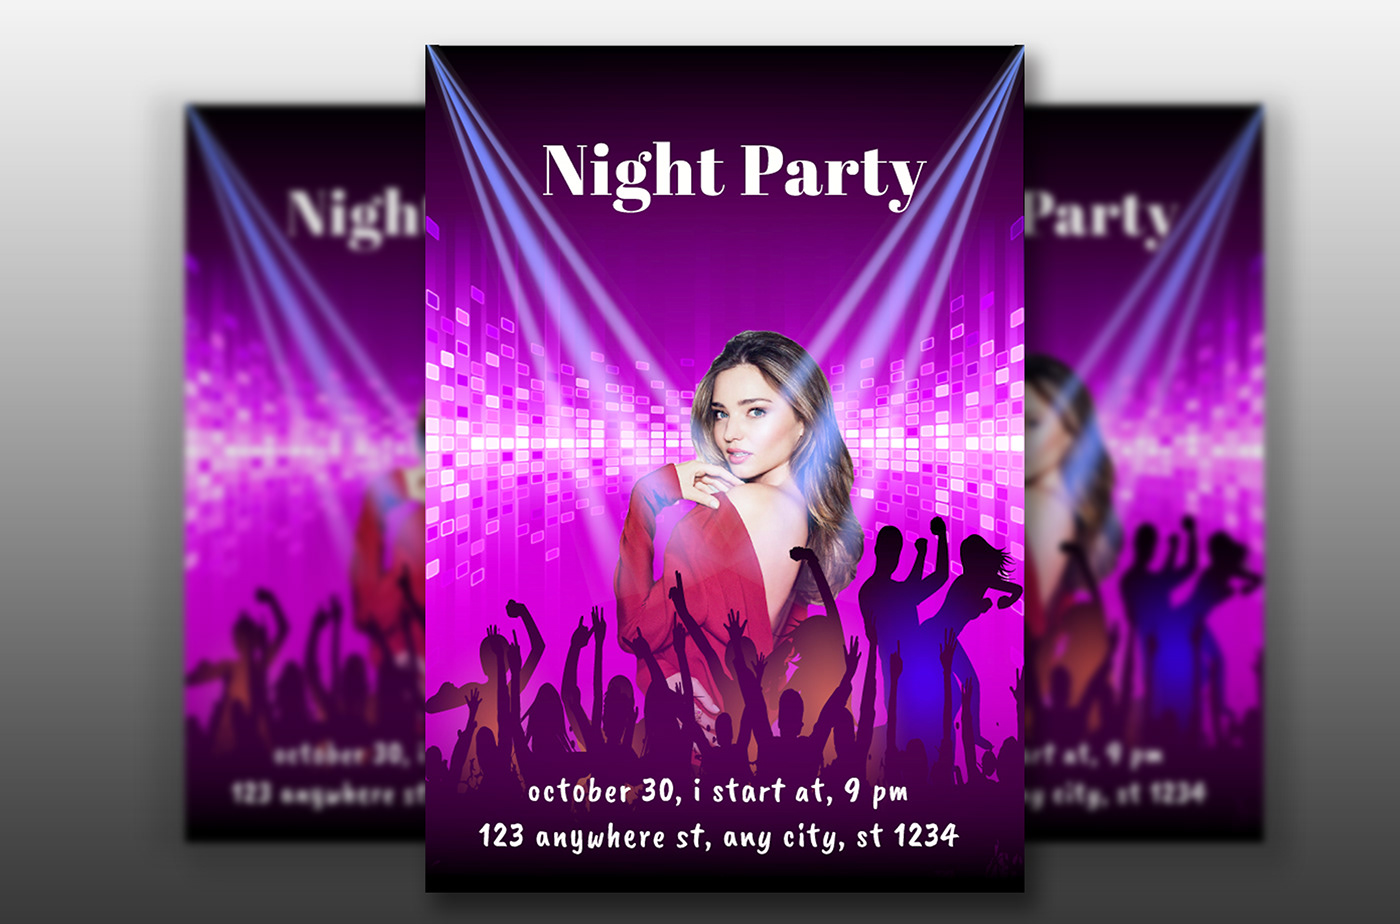 birthday party clebration Event Flyer Design independence day Invitation Night Party flyer design party flyer design poster